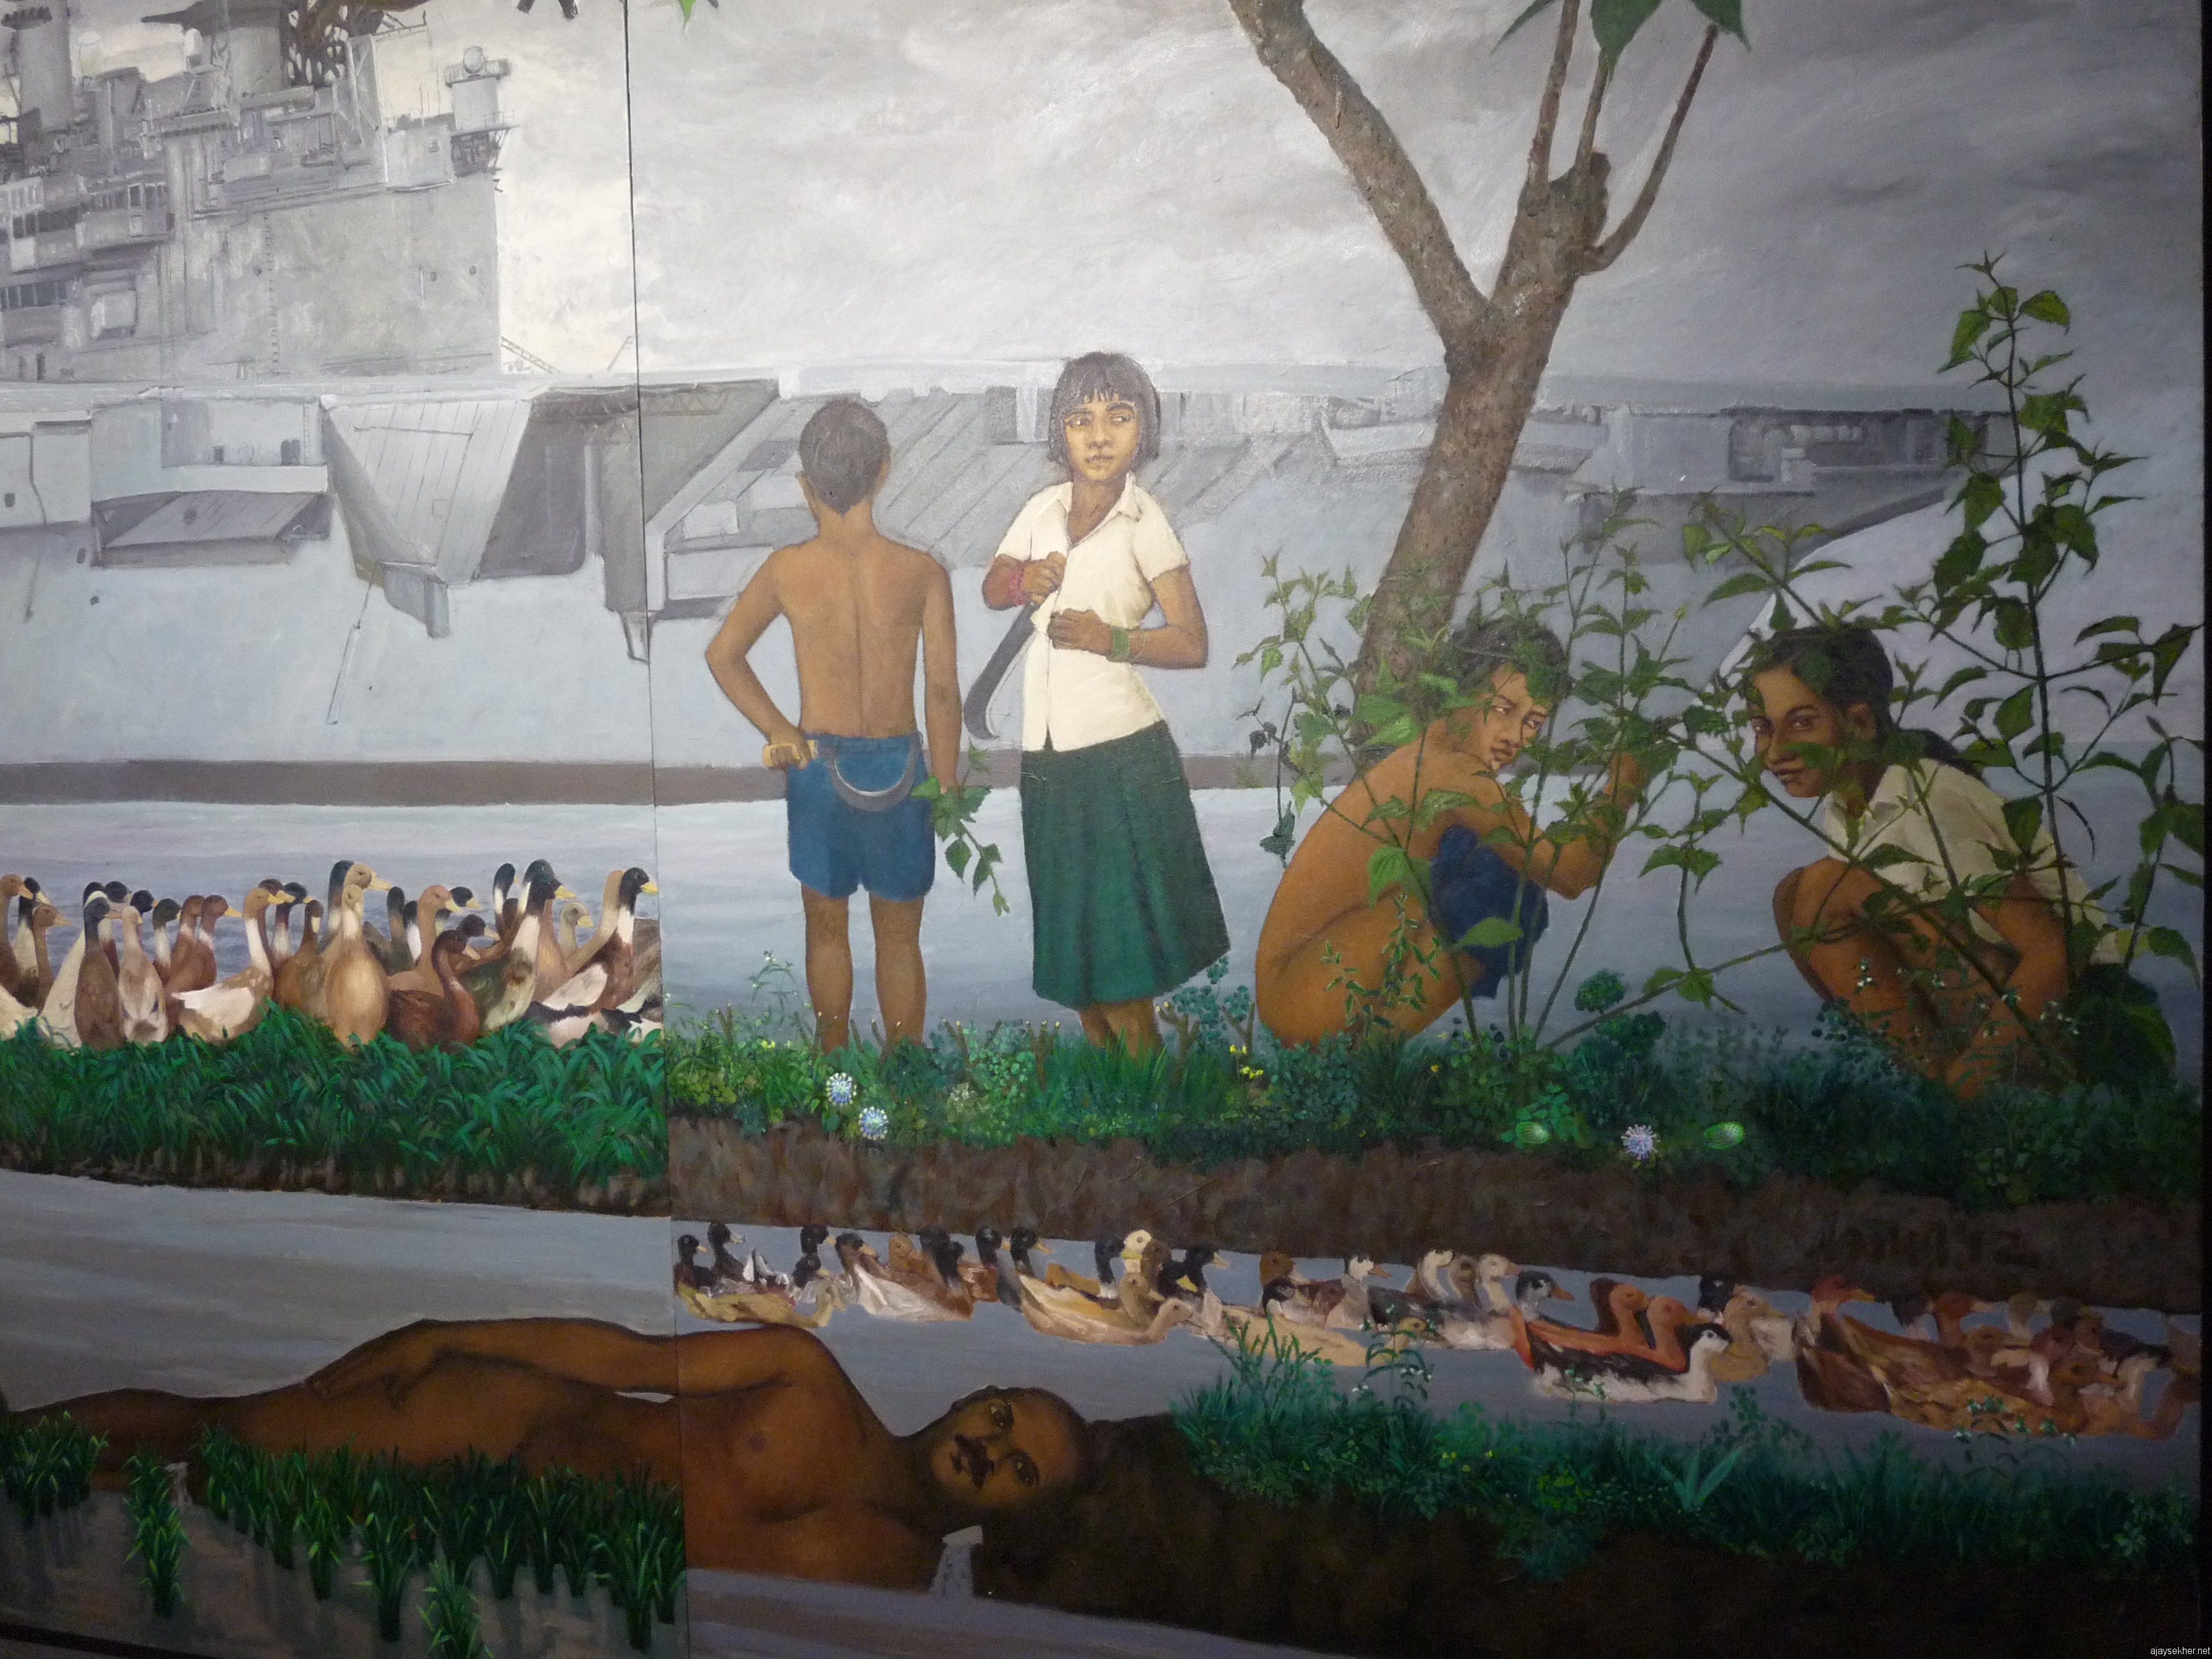 Detail from K P Reji's Thoombinkal Chathan.  See the life in the periphery still and the persistent presence of the past in the present, rendered through live imagery.